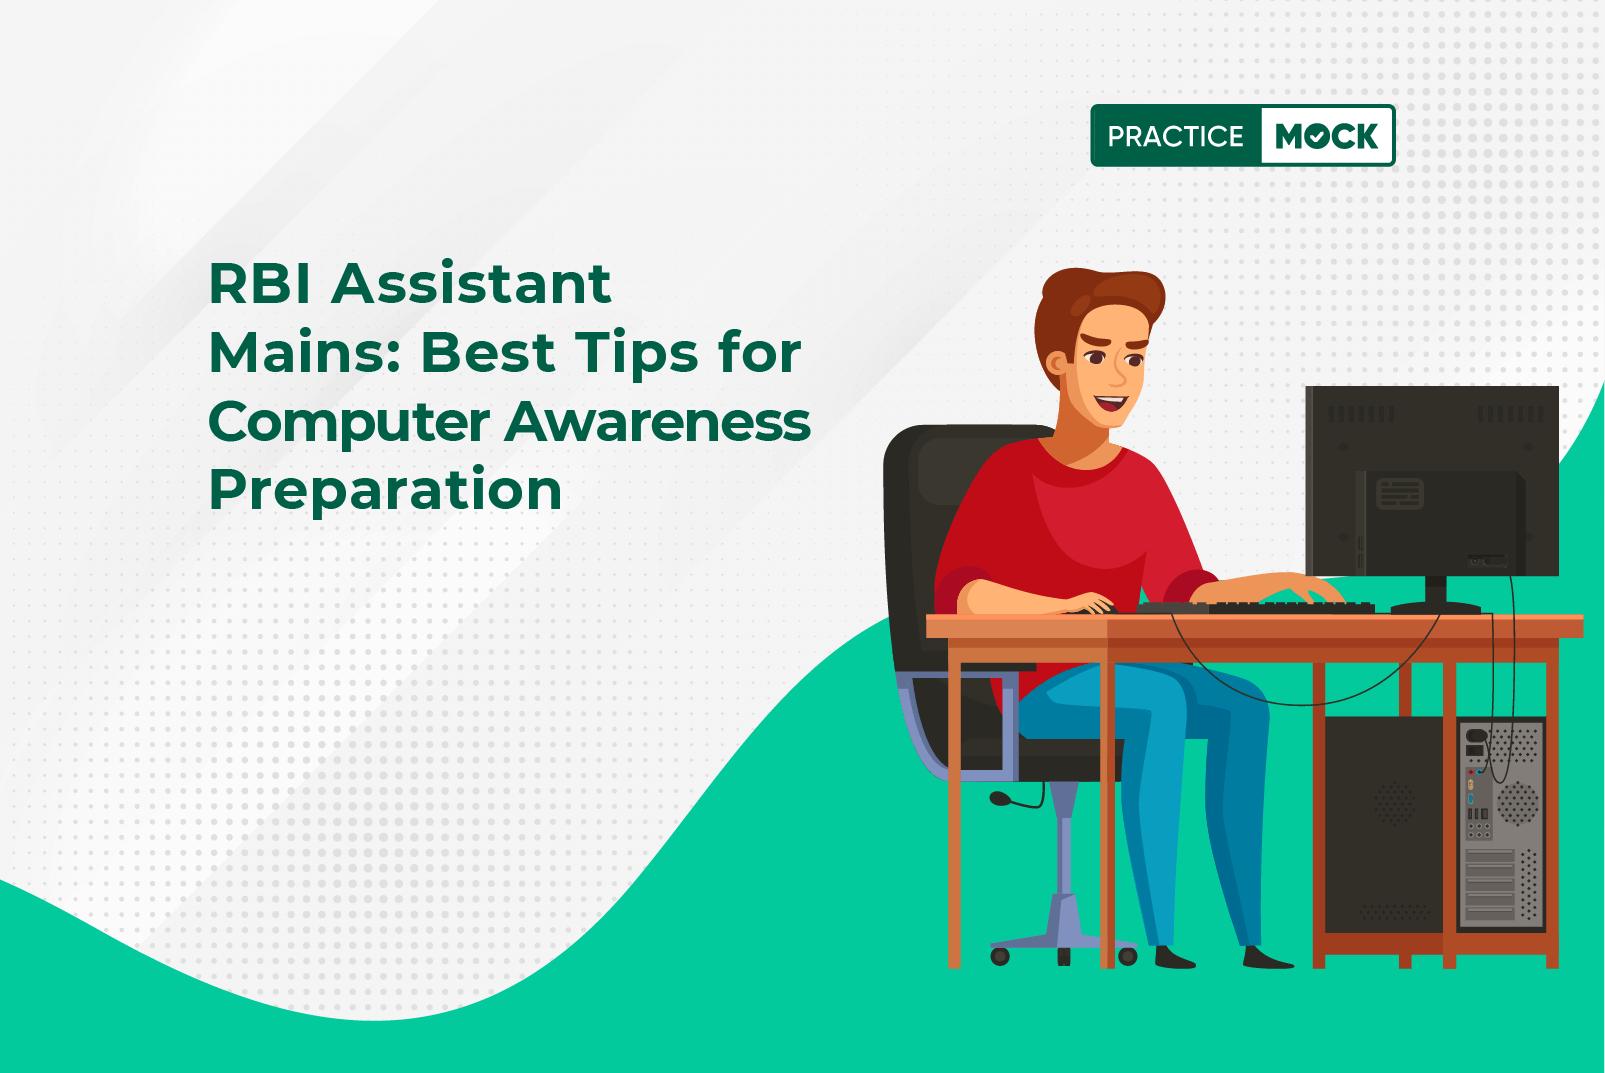 RBI Assistant Mains Best Tips for Computer Awareness